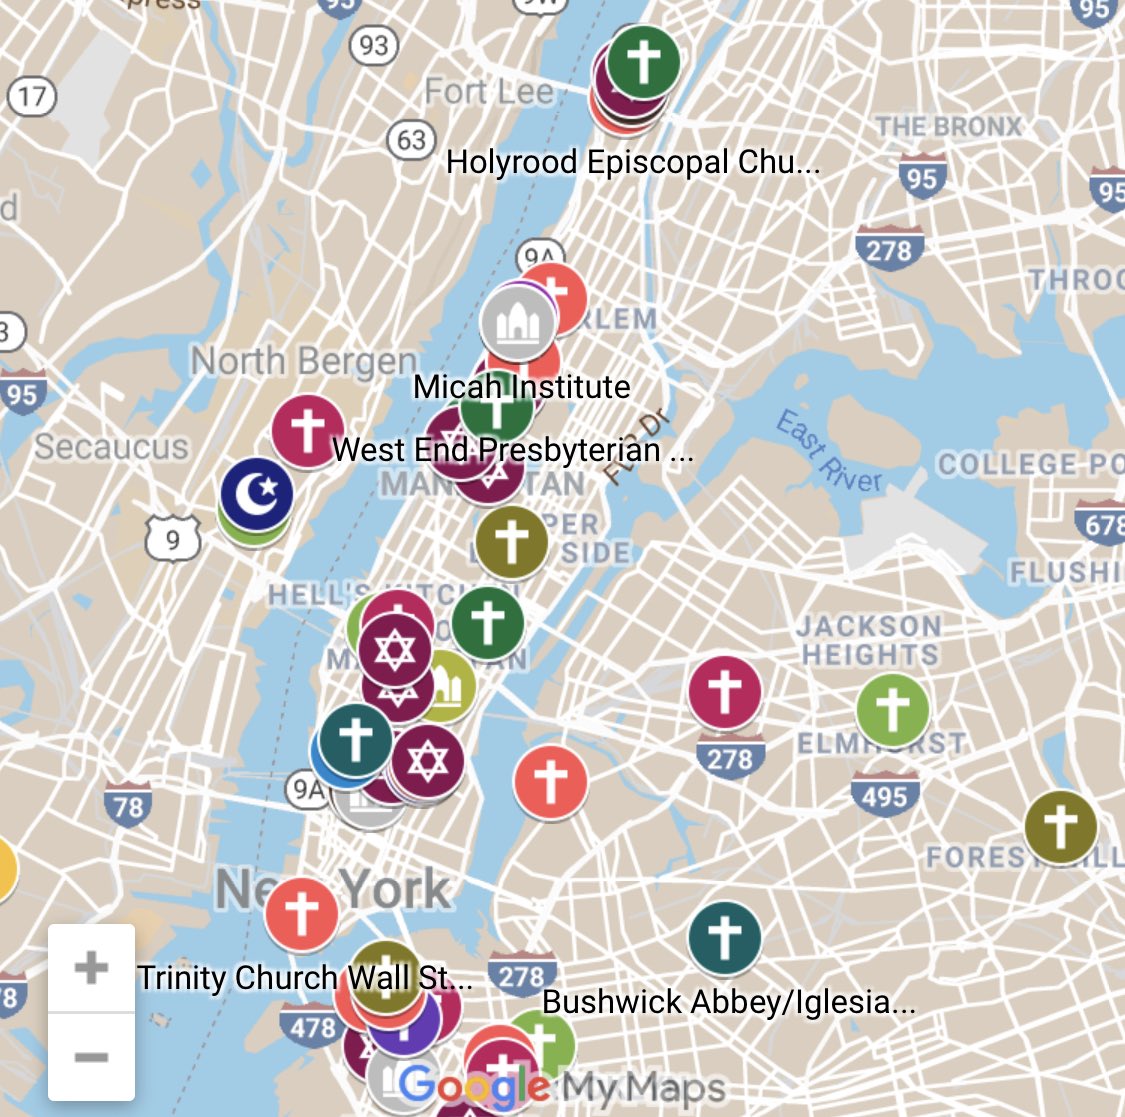 Ahead of planned ICE raids tomorrow, @NewSanctuaryNYC has a map of faith communities offering sanctuary to undocumented immigrants. #ICERaids #TrumpRaids google.com/mymaps/viewer?…